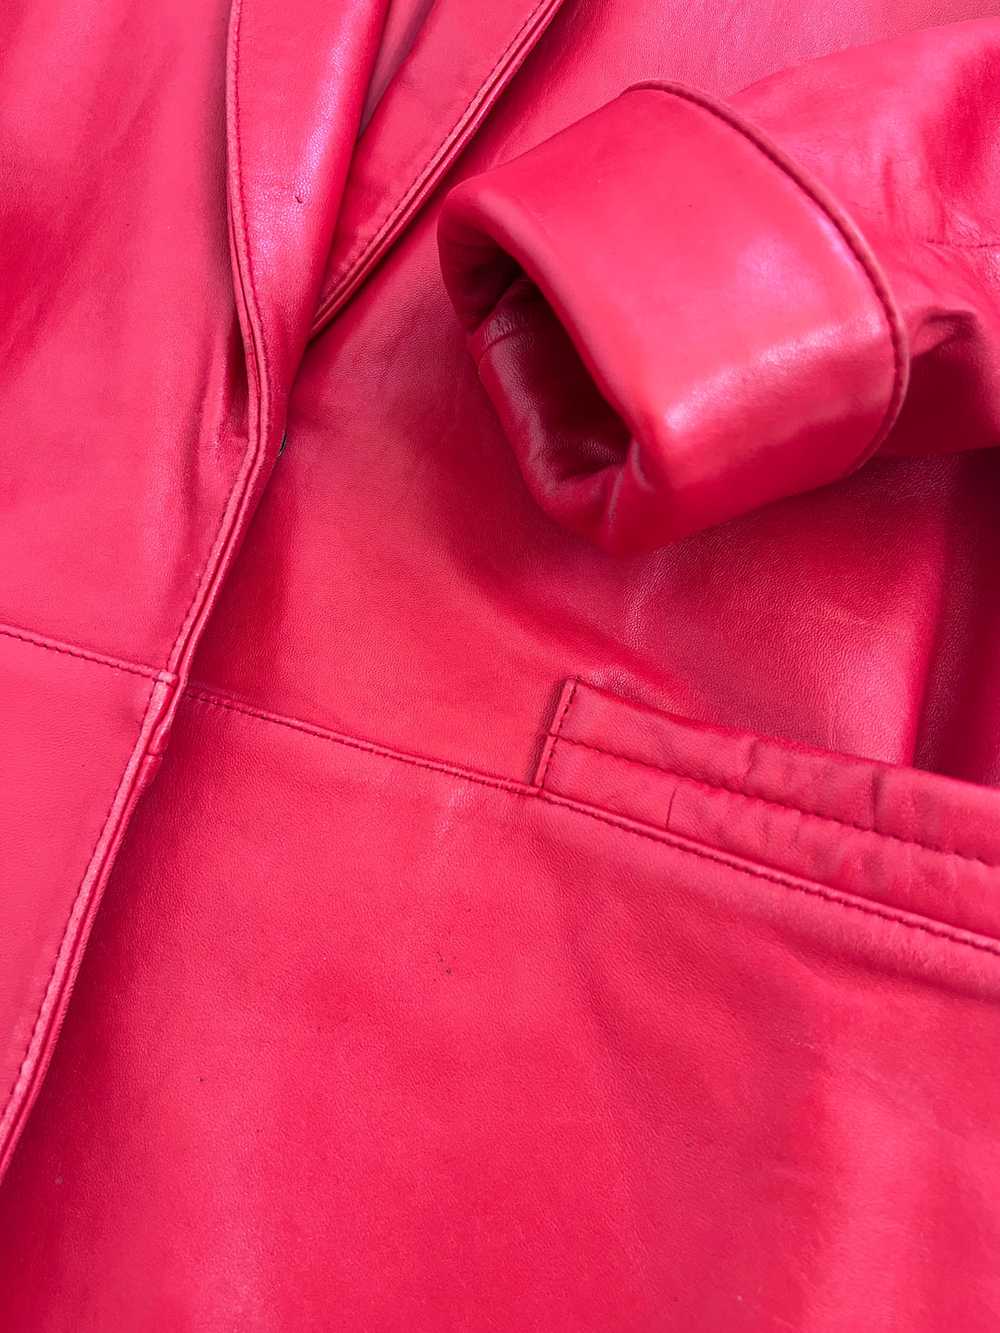 Red Leather Jacket - image 11